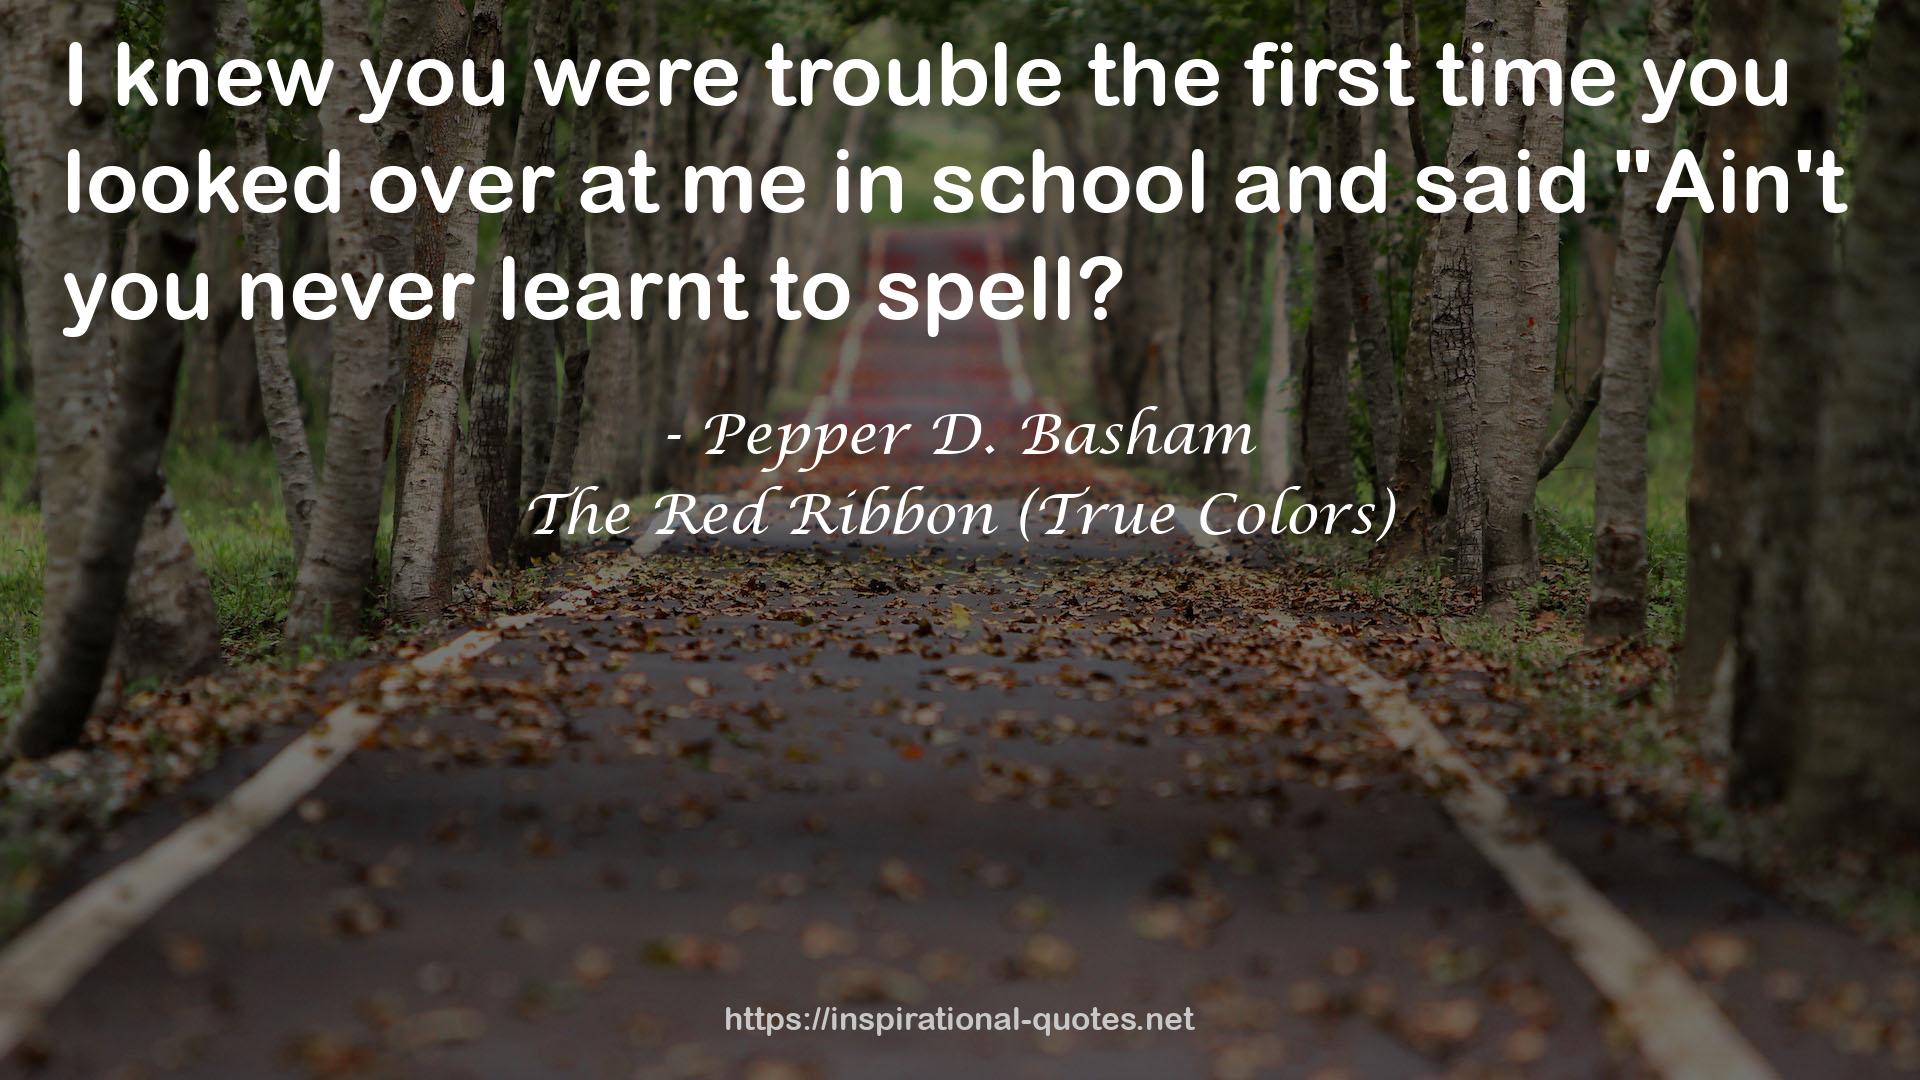 The Red Ribbon (True Colors) QUOTES